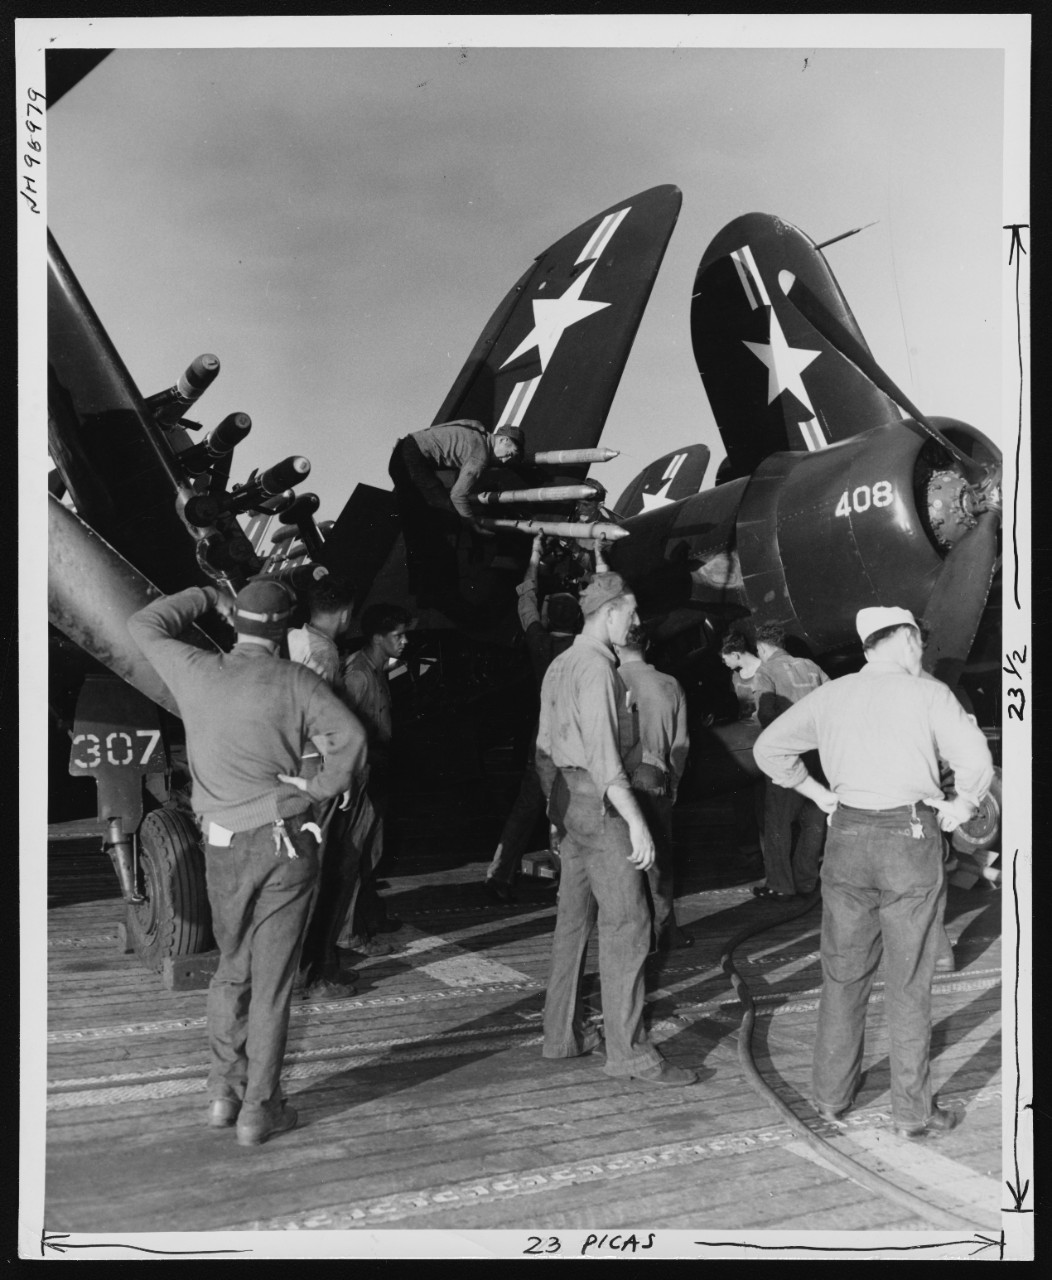 Photo #: NH 96979  USS Valley Forge (CV-45)